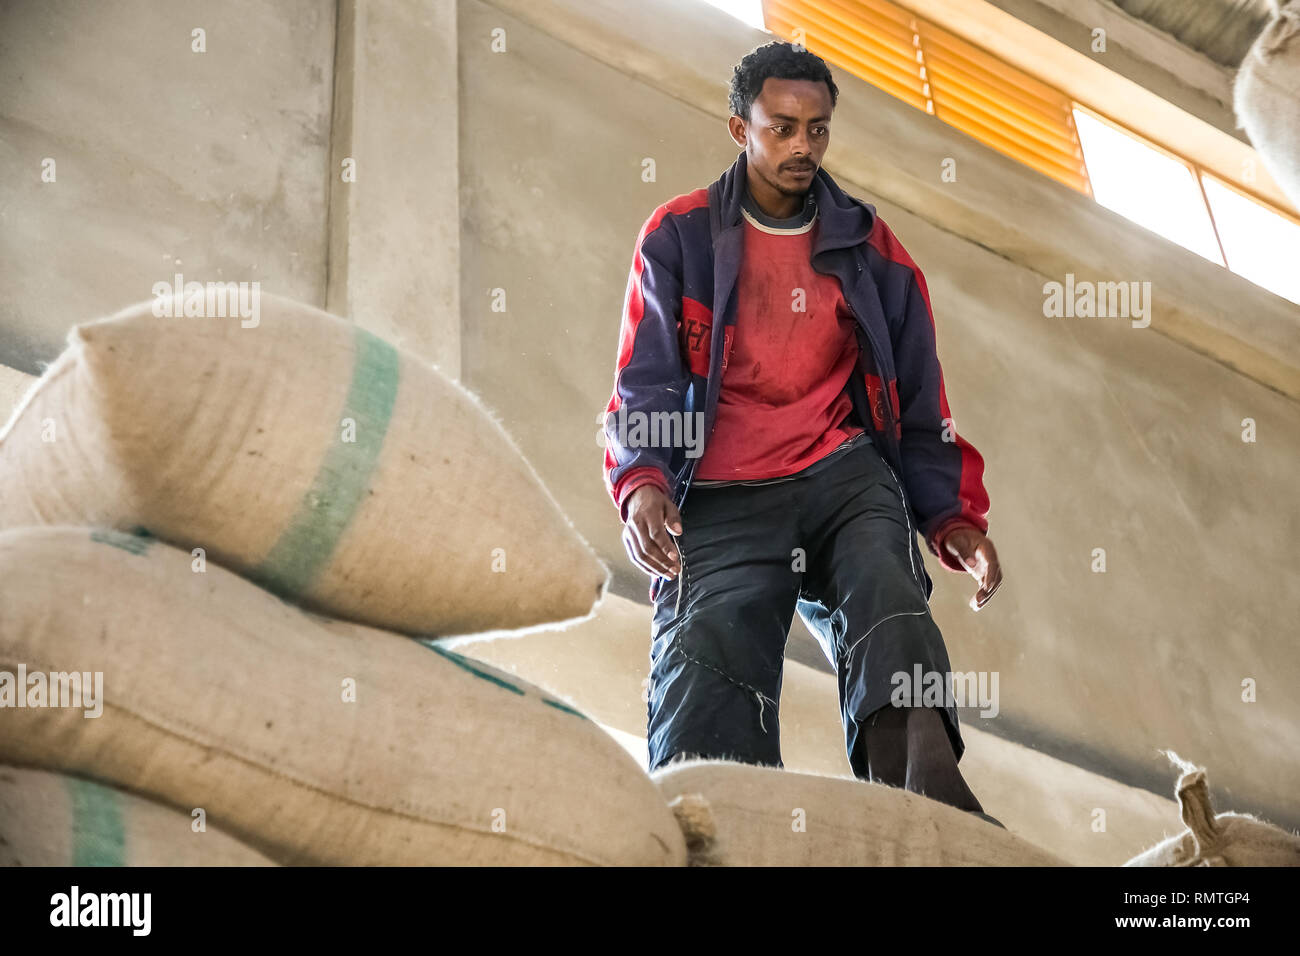 Addis Ababa, Ethiopia - January 30 2014: Men stacking large bags of coffee beans in a warehouse Stock Photo